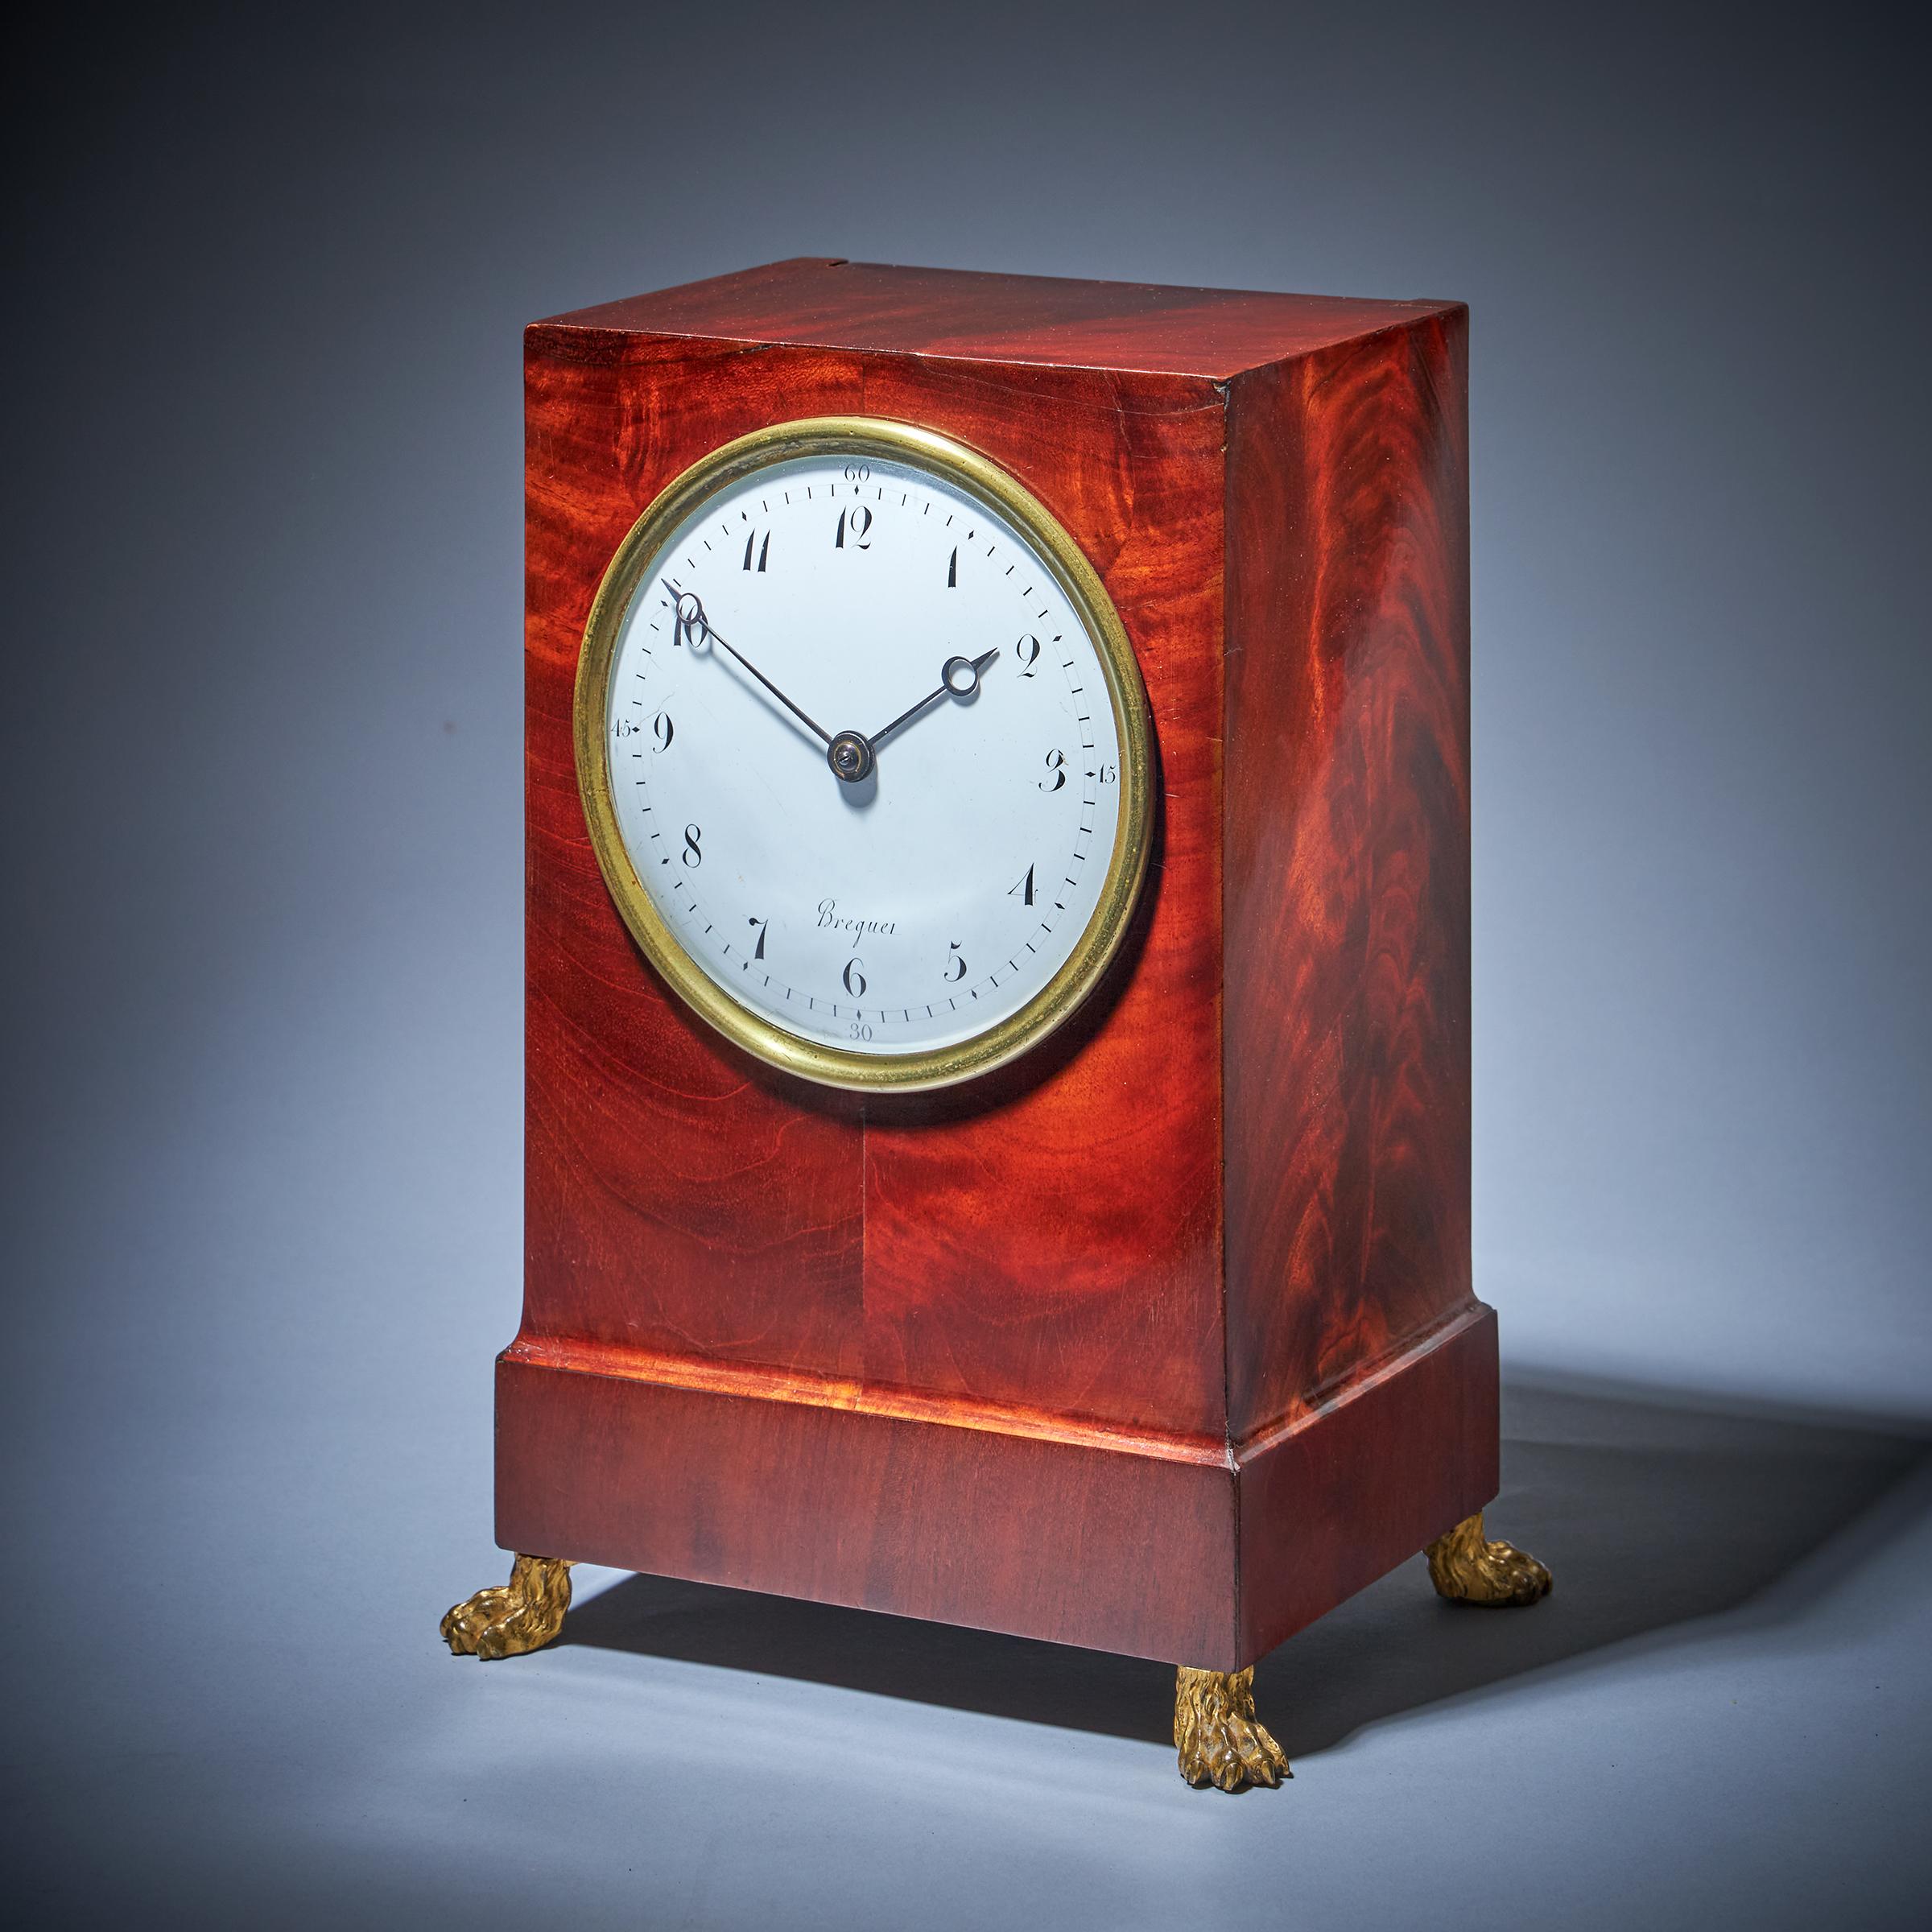 An extremely rare mantel clock with a figured mahogany-veneered case by A-L Breguet
 
Abraham-Louis Breguet (1747-1823), who was of Swiss origin, is undoubtedly the most celebrated clockmaker of the late eighteenth and early nineteenth centuries in